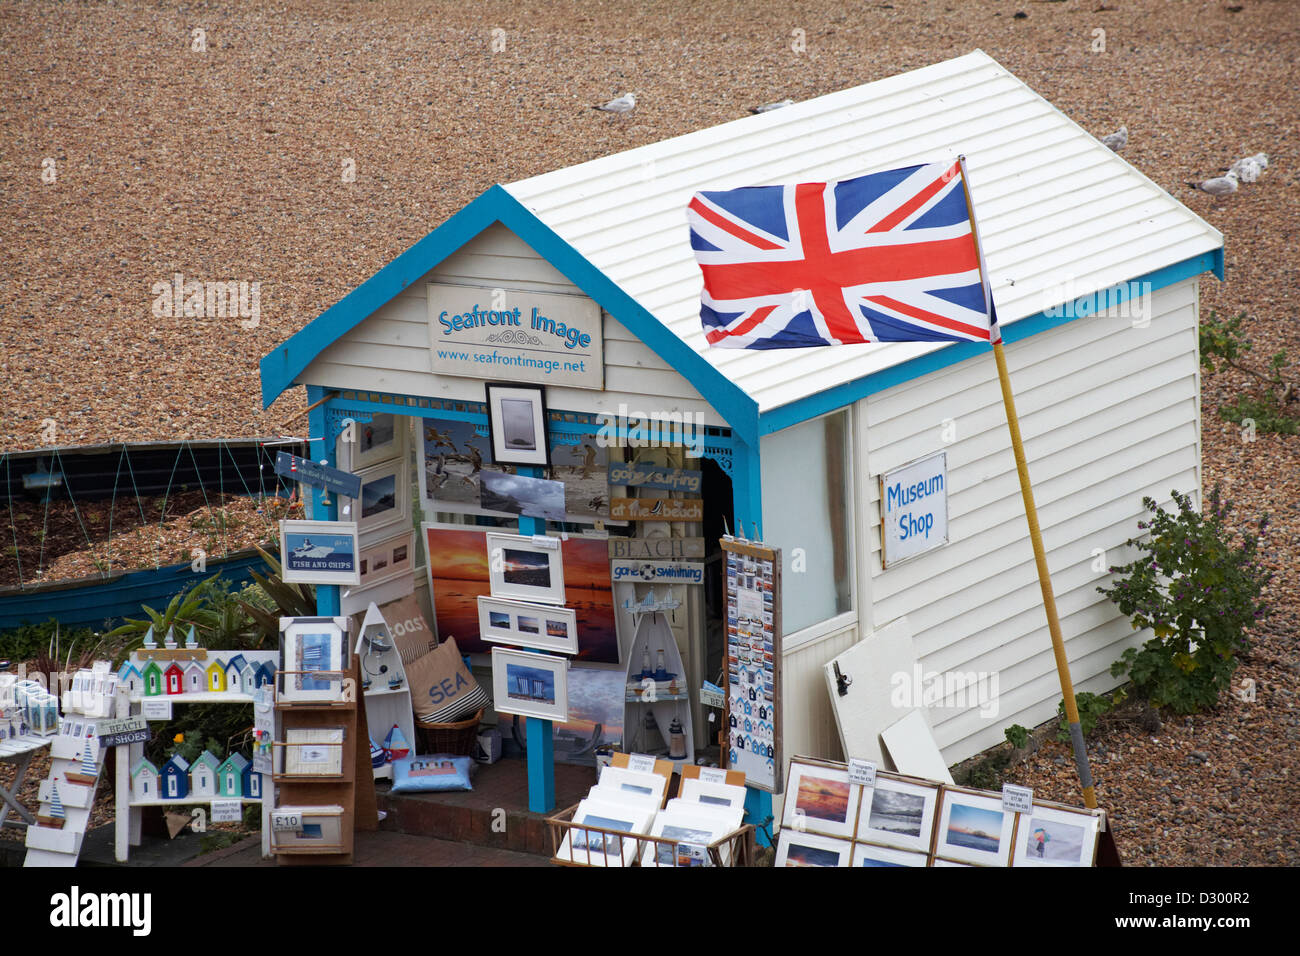 Seafront Image Museum Shop on Brighton beach in May Stock Photo